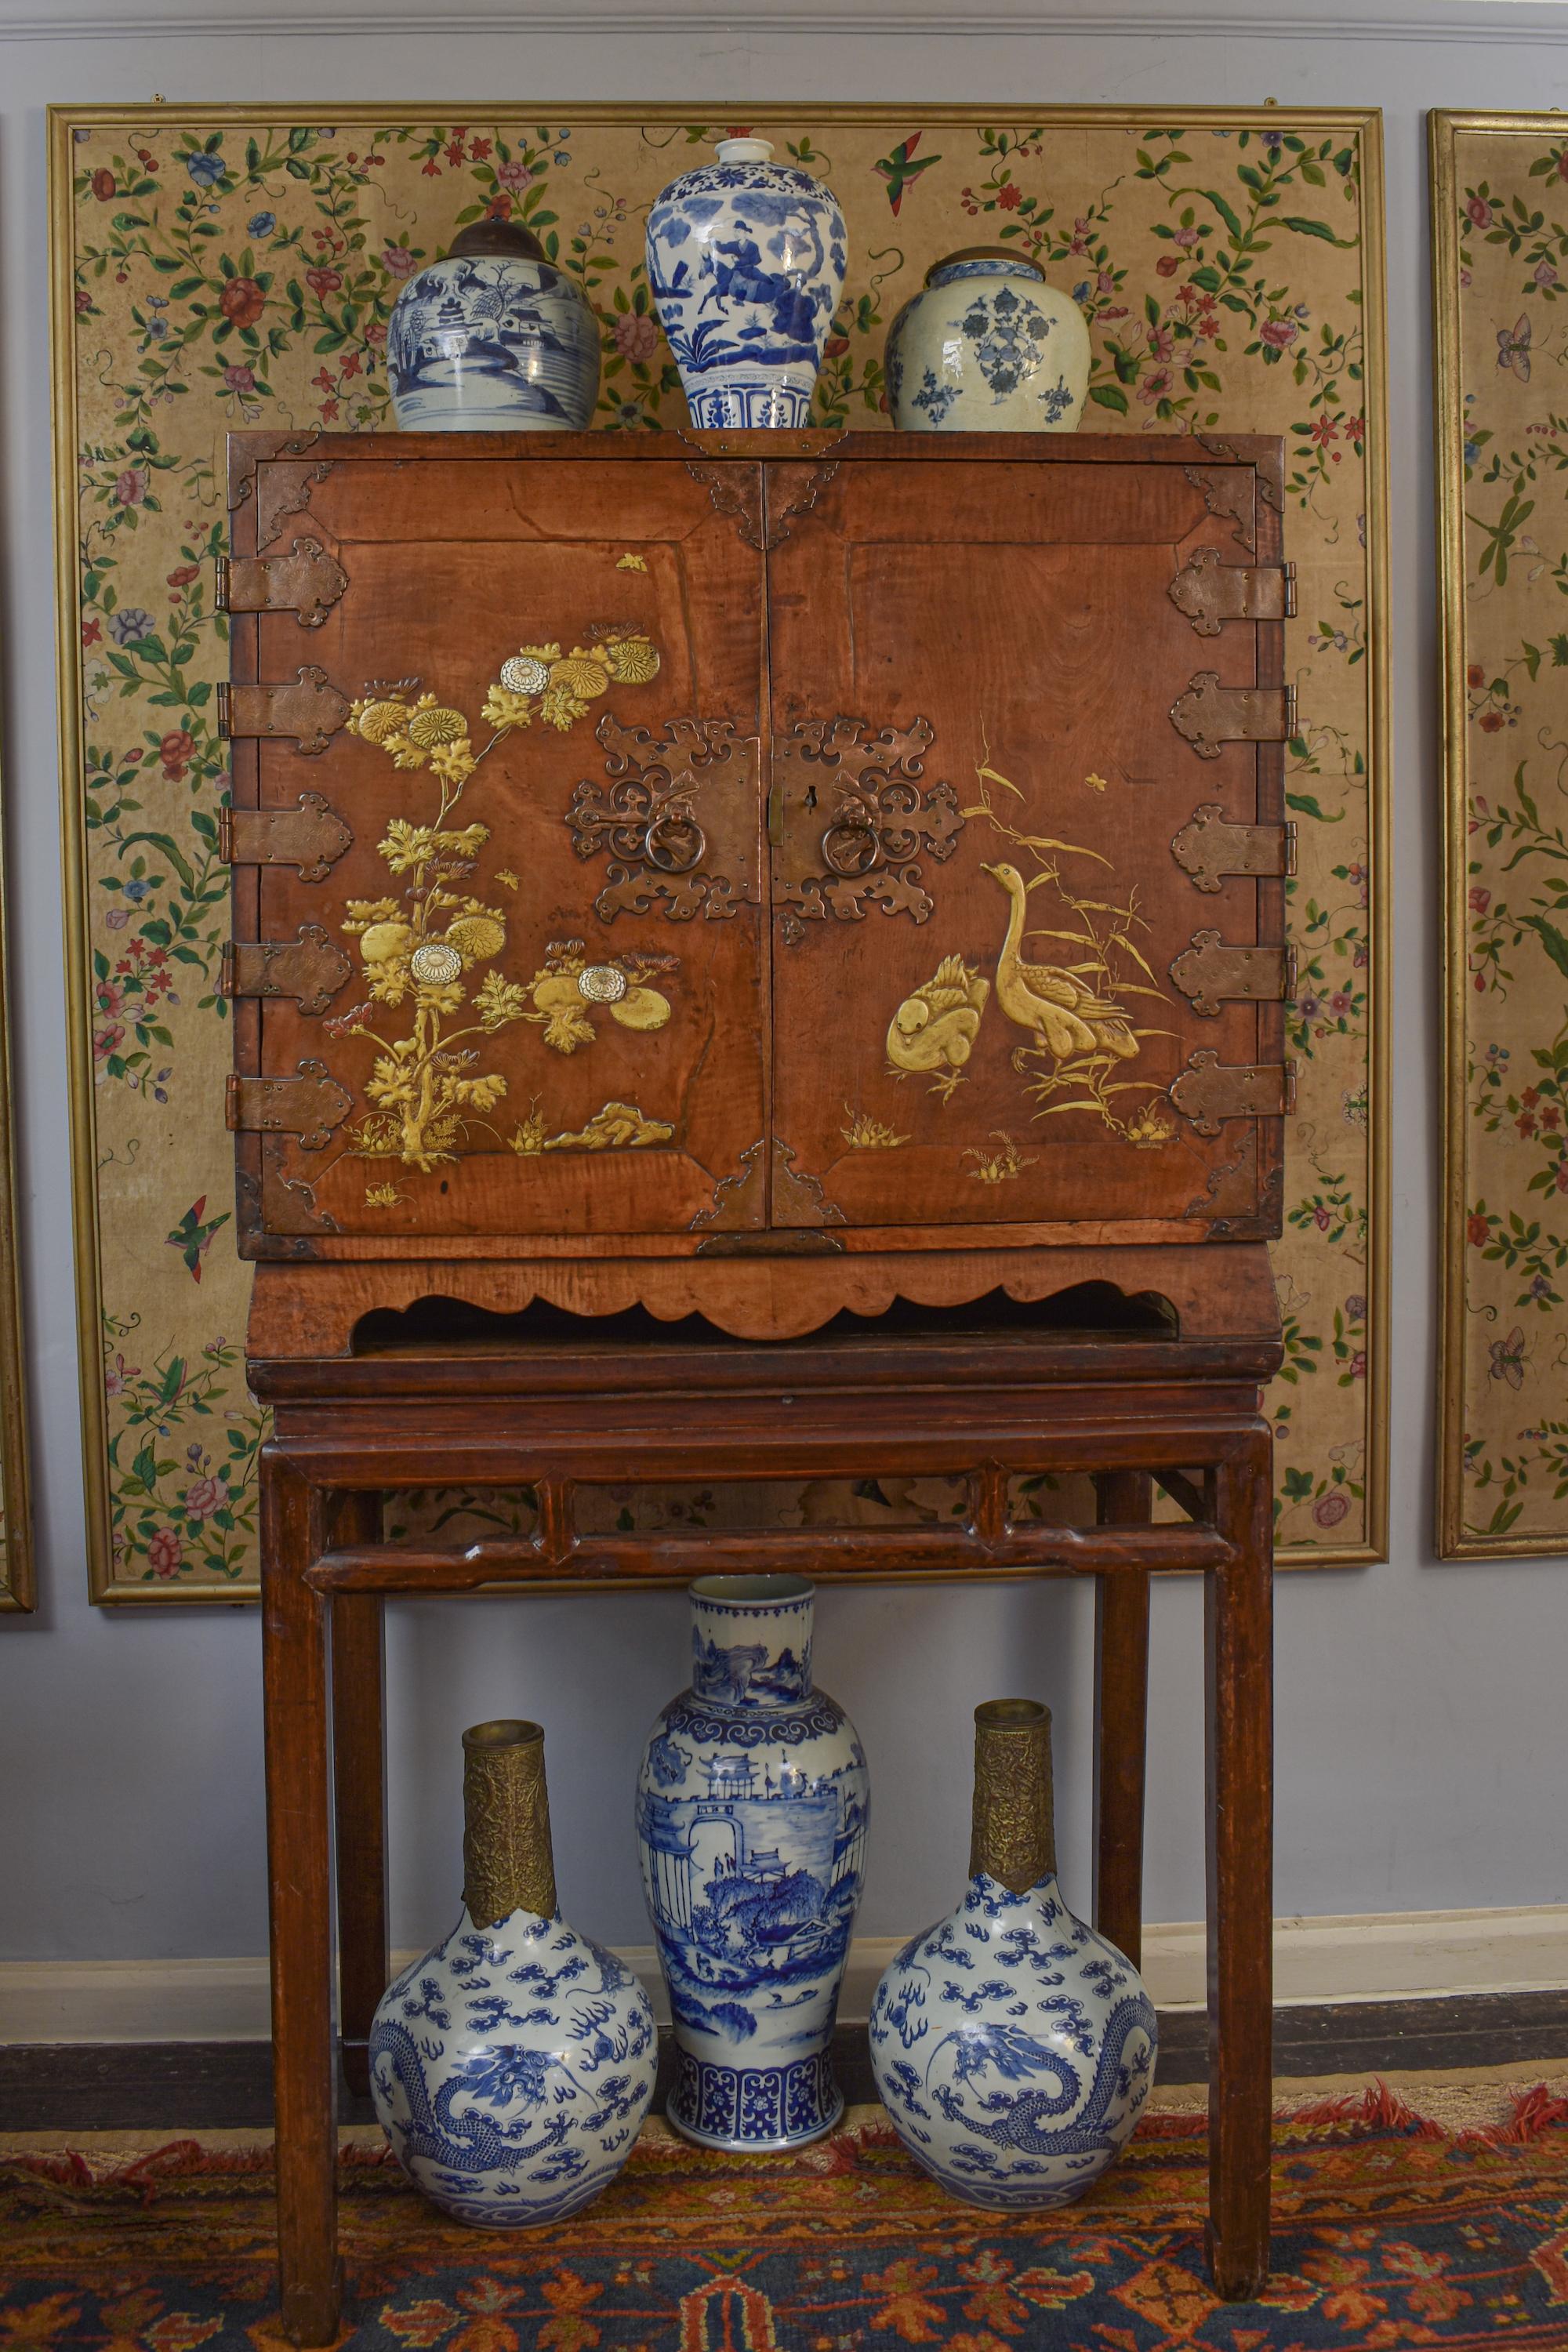 An outstanding and rare, 17th-century Japanese mulberrywood gilt-lacquer cabinet raised on a later stand.

This fine and exceptional two-door, gilt-heightened cabinet - reputedly in mountain mulberry wood - decorated in the typical Japanese manner